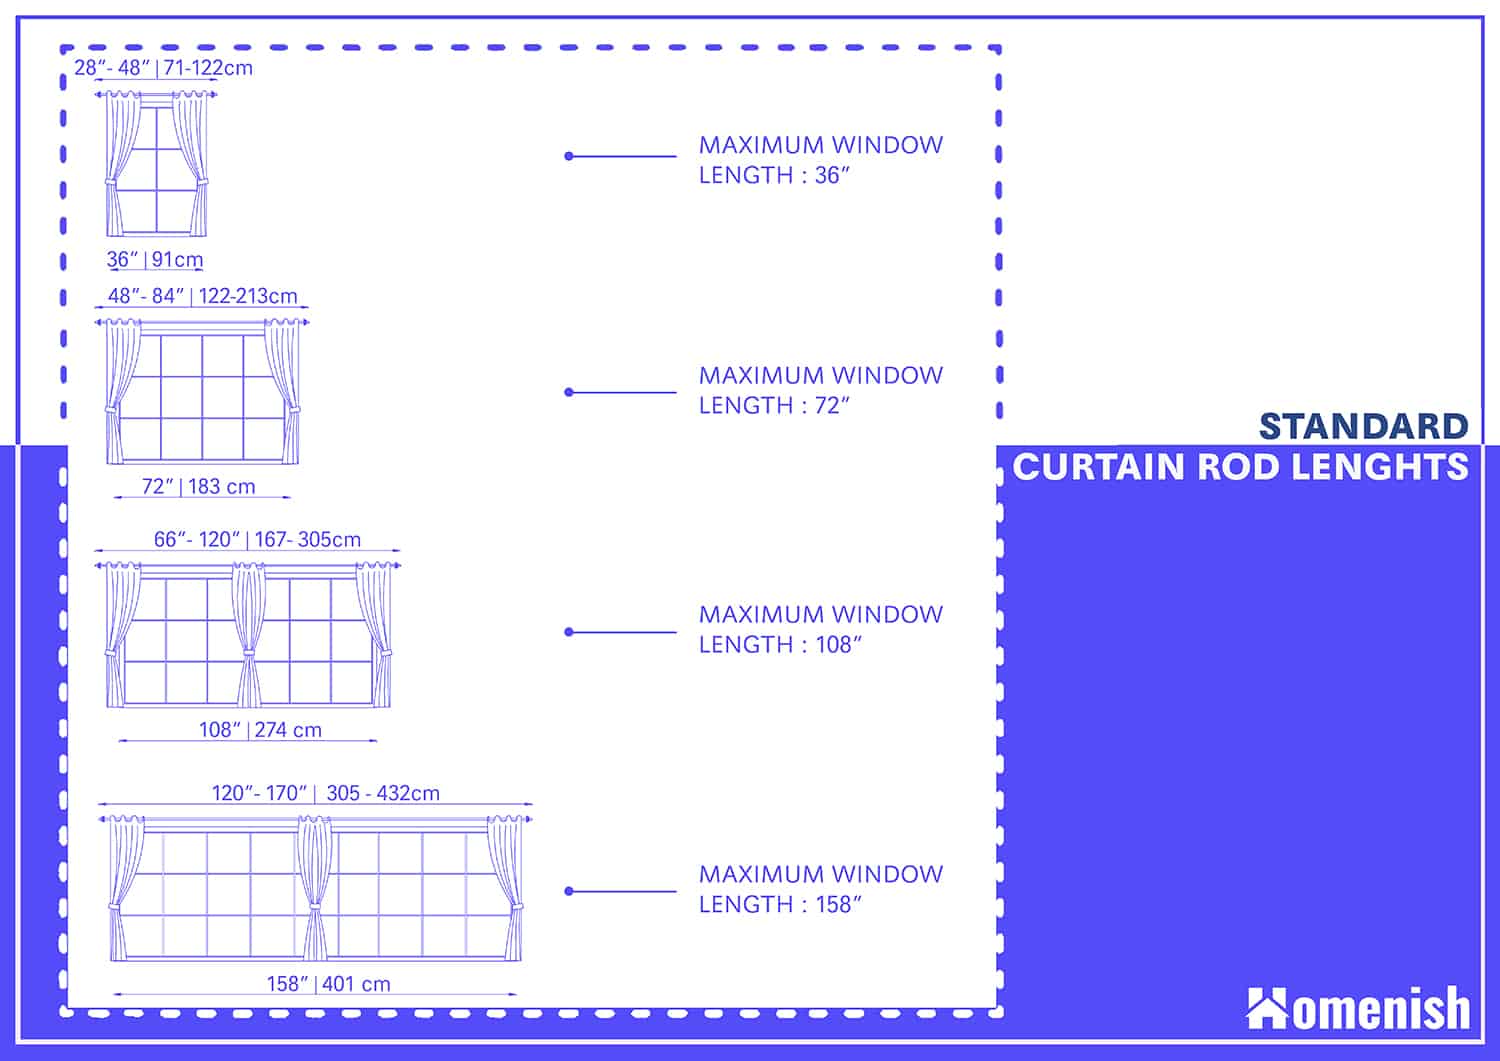 Curtain Rod Lengths Explained Diagram, How To Tell Curtain Size